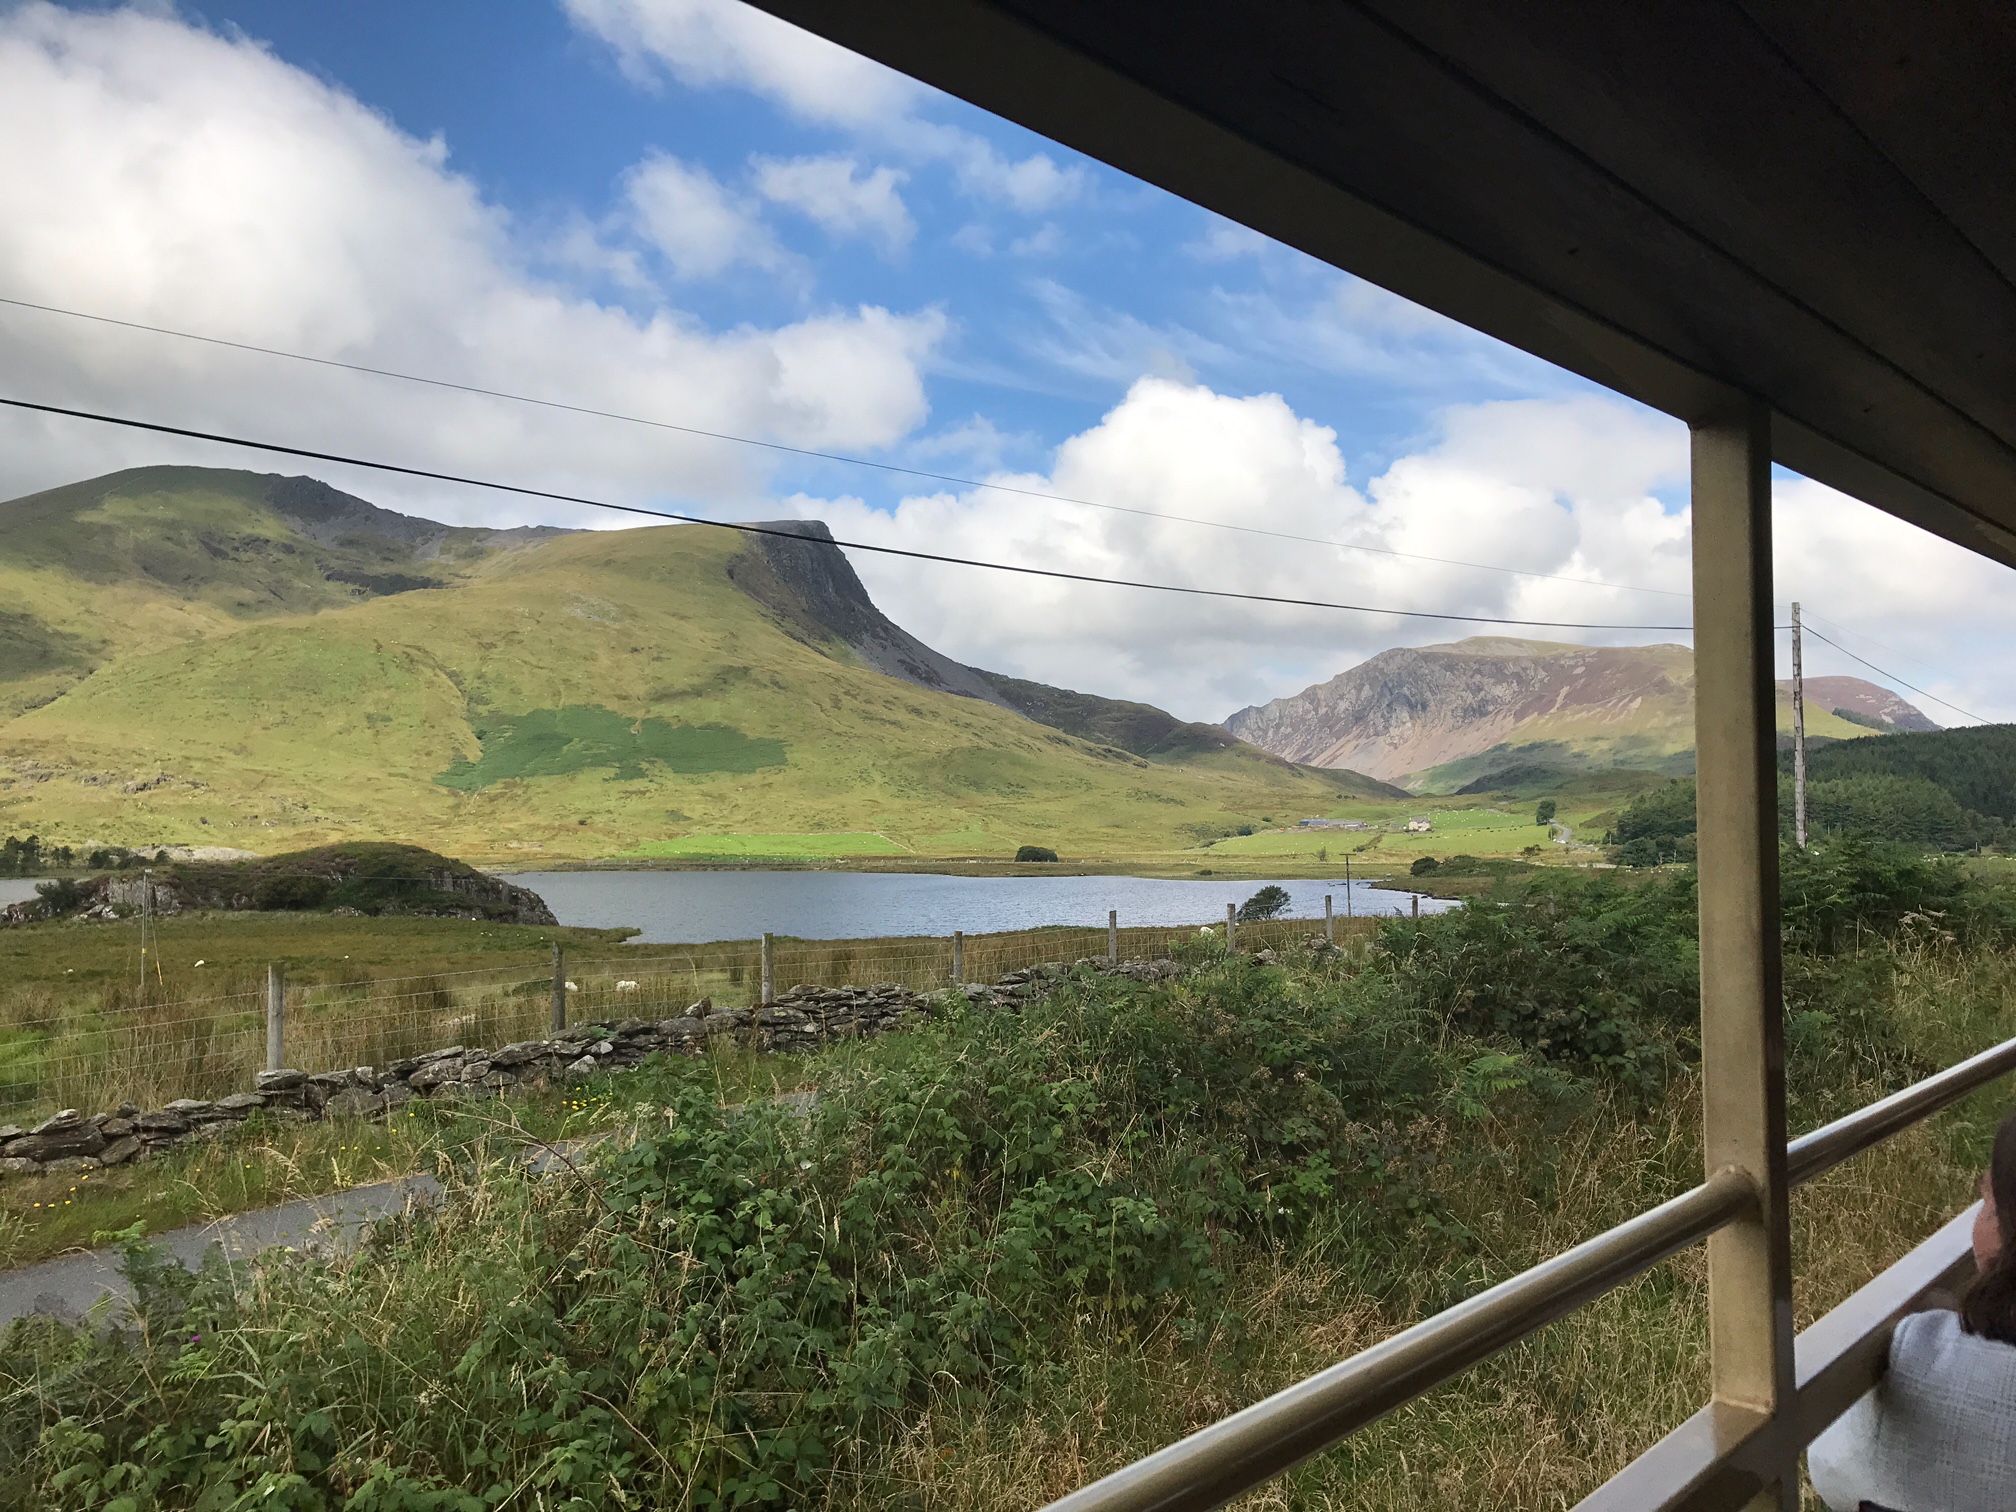 Great Little Trains of Wales: Snowdonia.